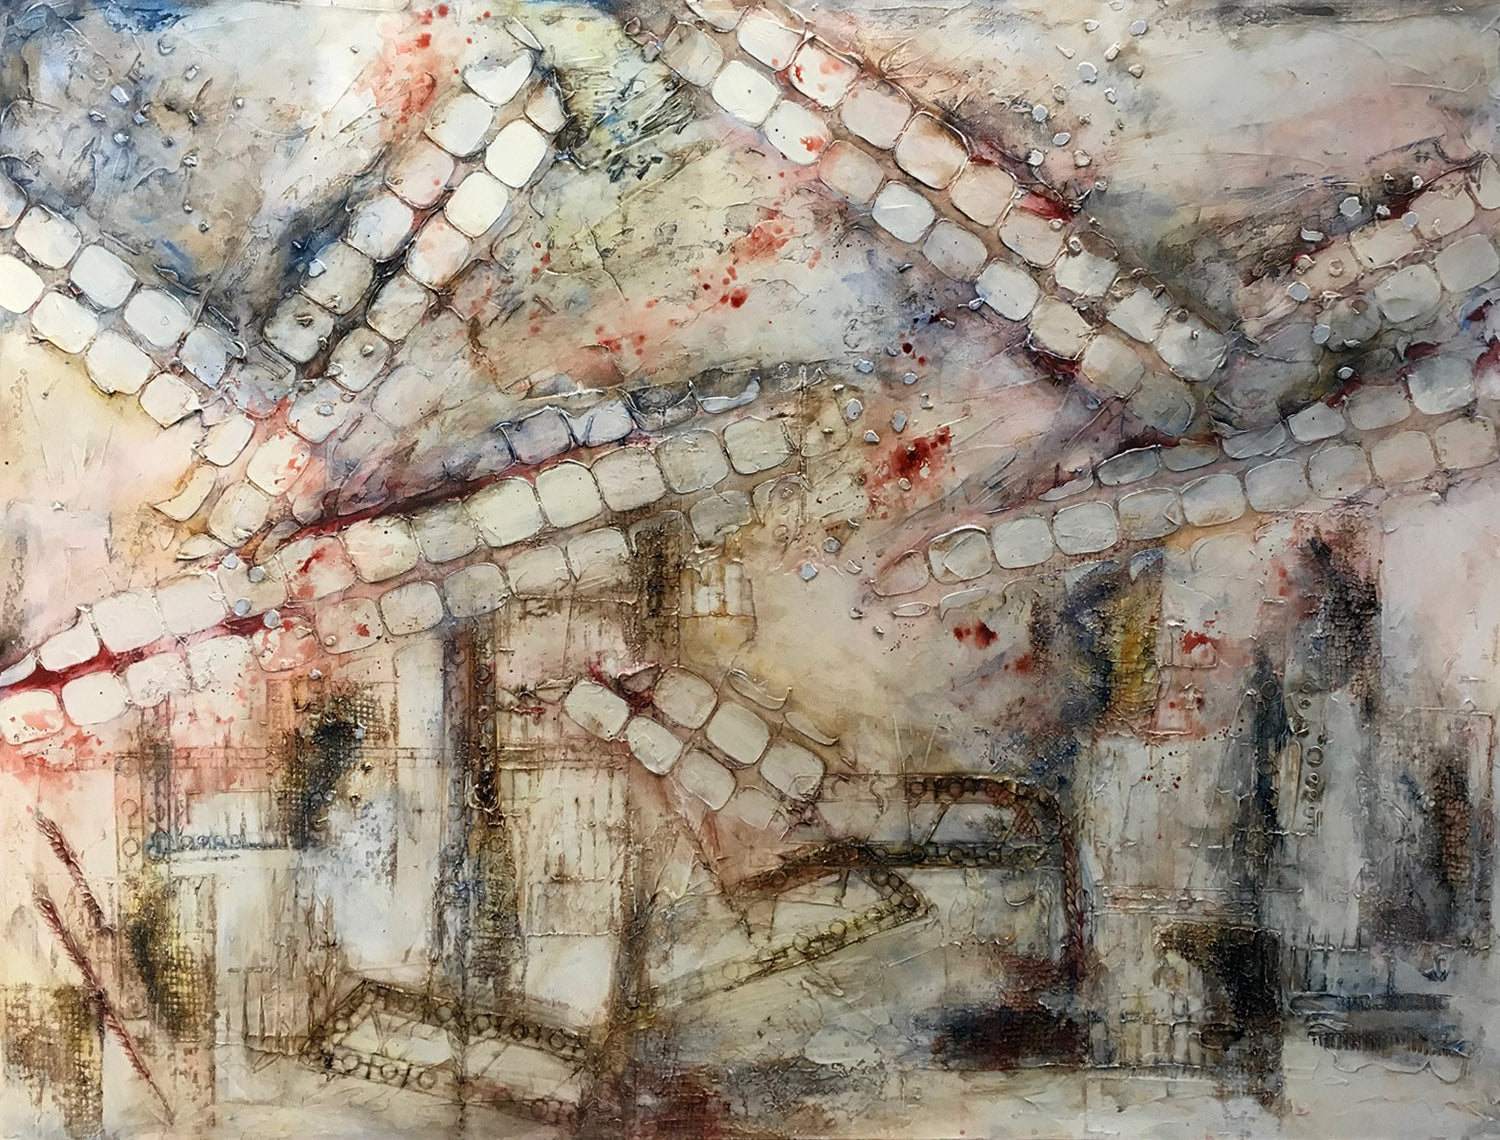 20/20, Mixed Media on Canvas, 36"H x 48"W, 1.5"D, 2020